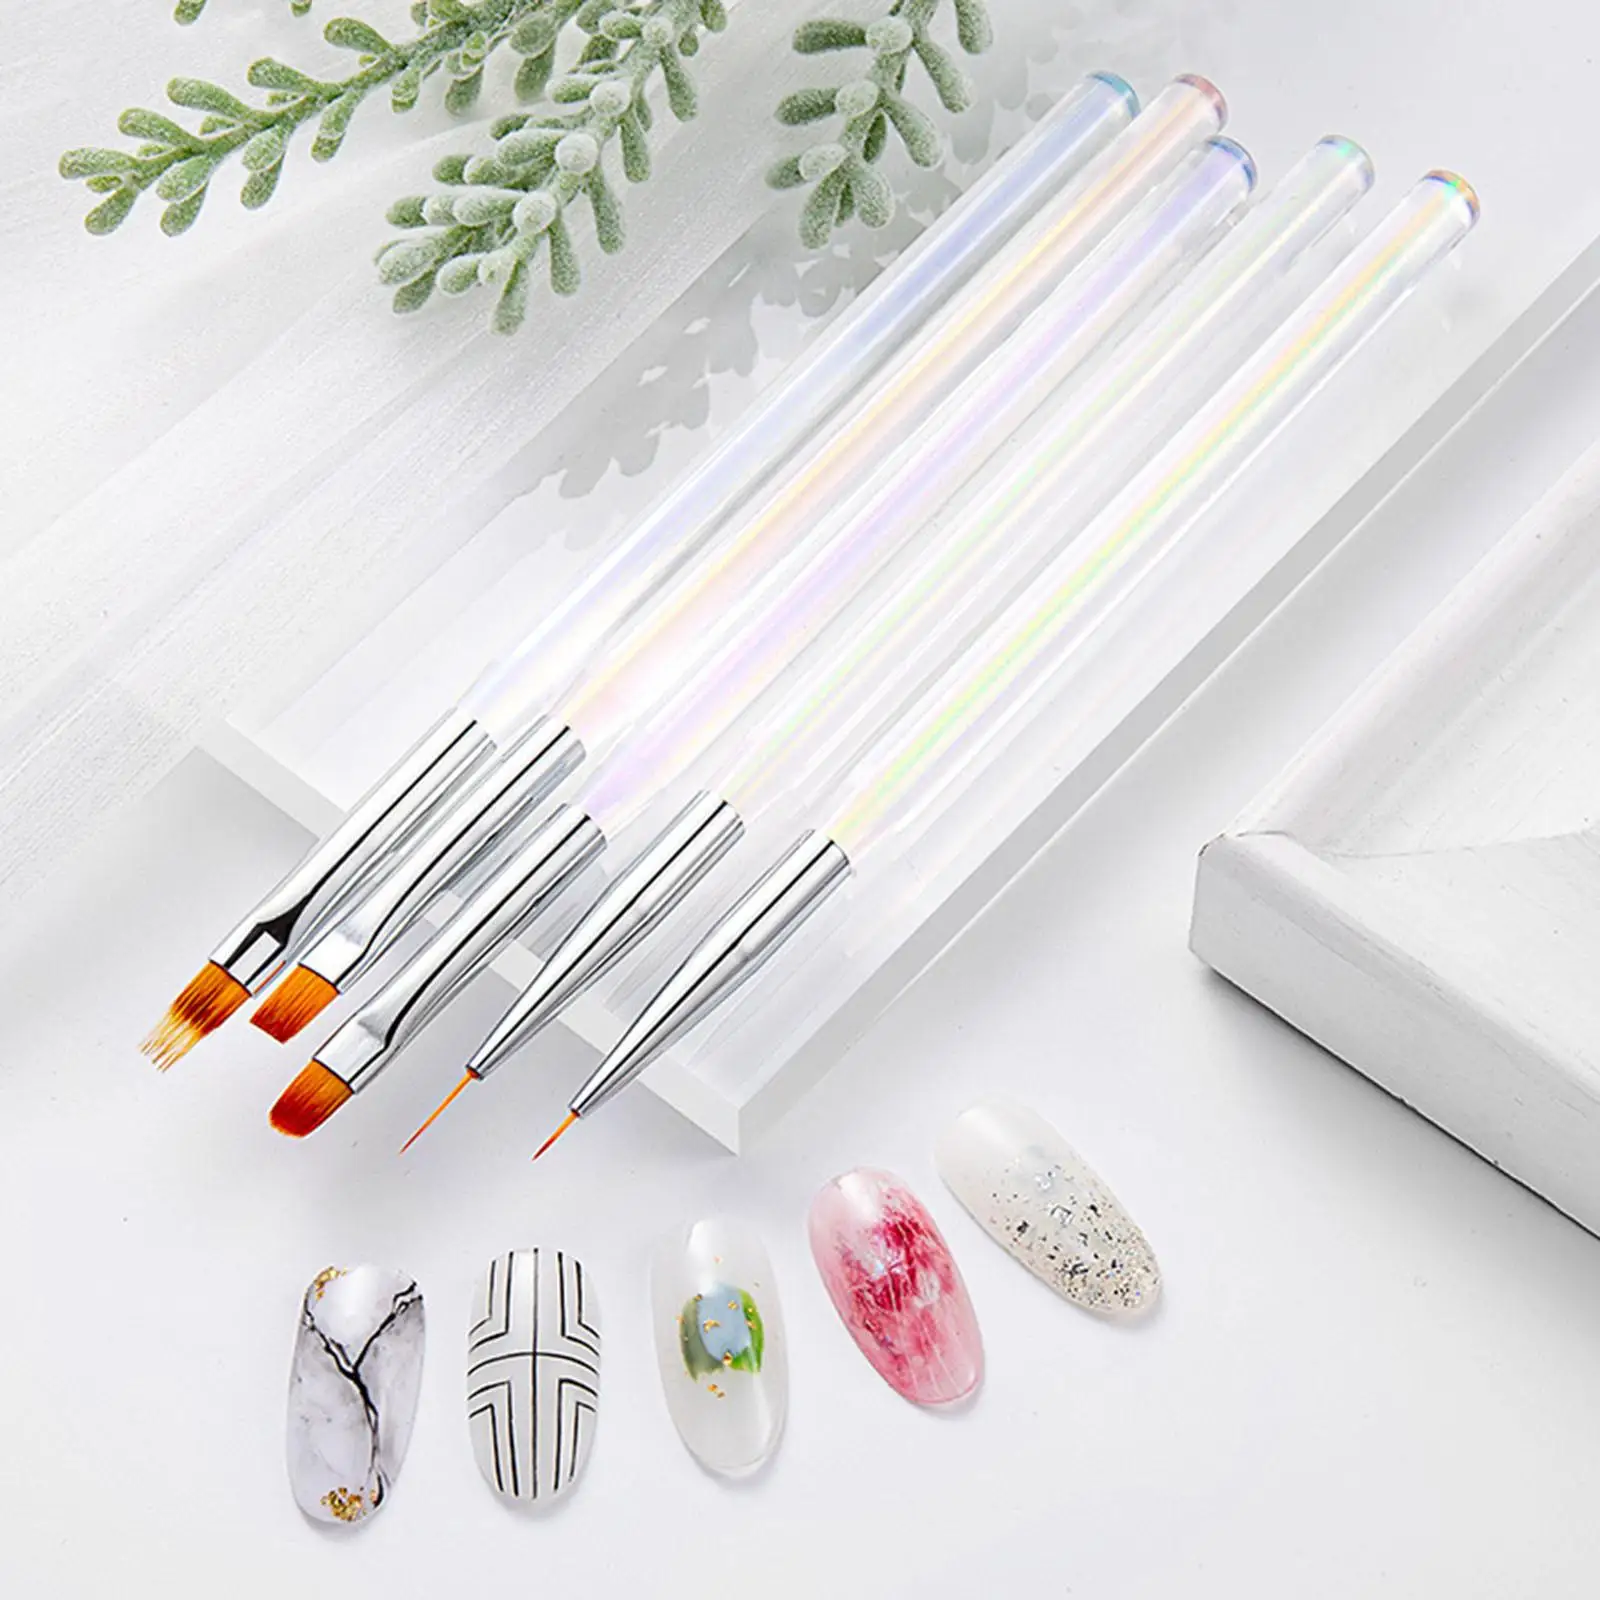 5x Nail Art Drawing Brush Pen Manicure Tool UV Gel Tips Liner Polish Spatula Stick Painting Accessories Dotting for Home DIY